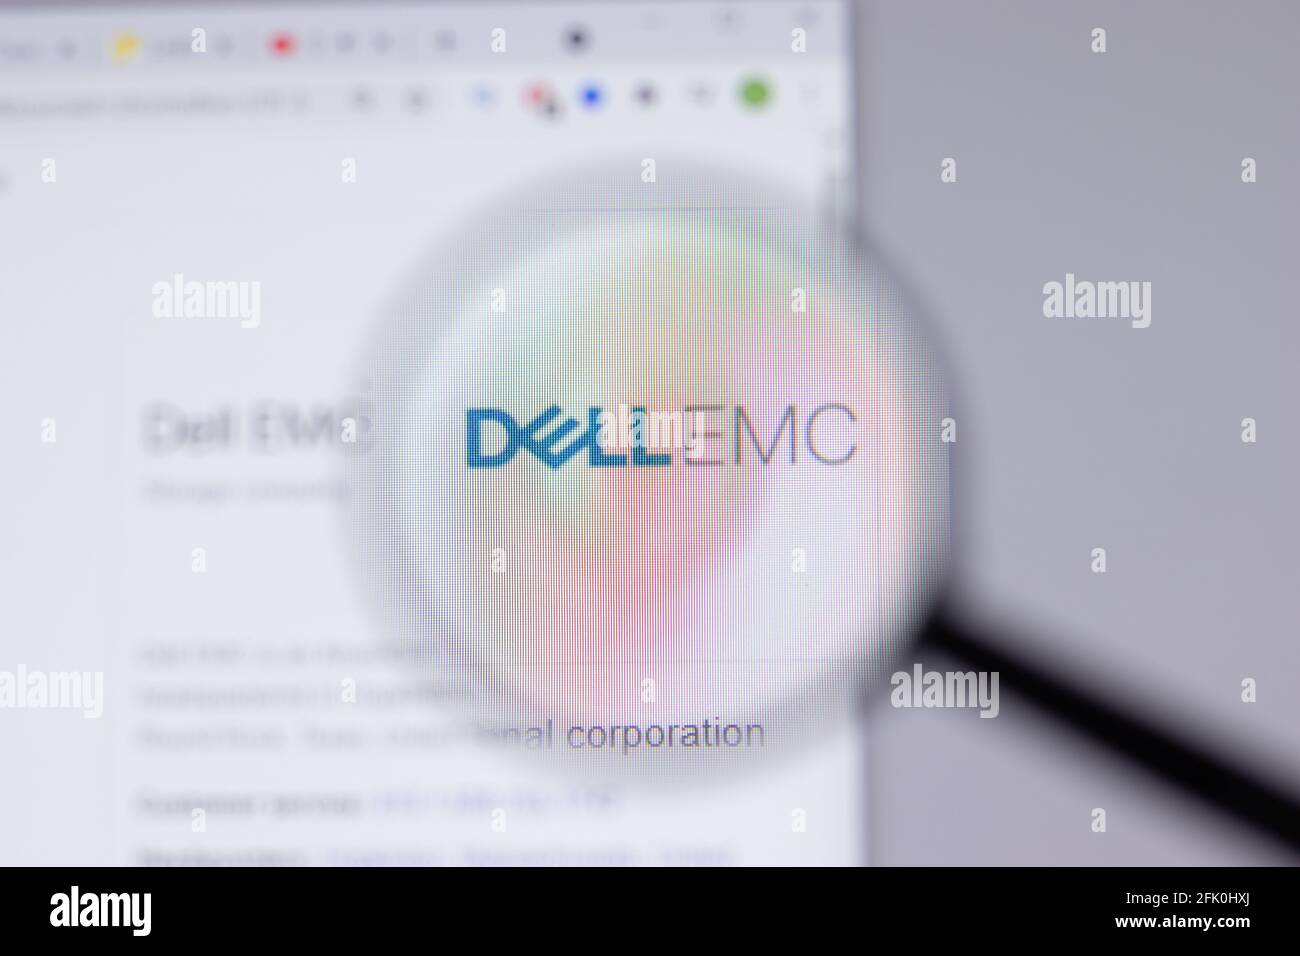 New York, USA - 26 April 2021: Dell EMC logo close-up on website page, Illustrative Editorial Stock Photo